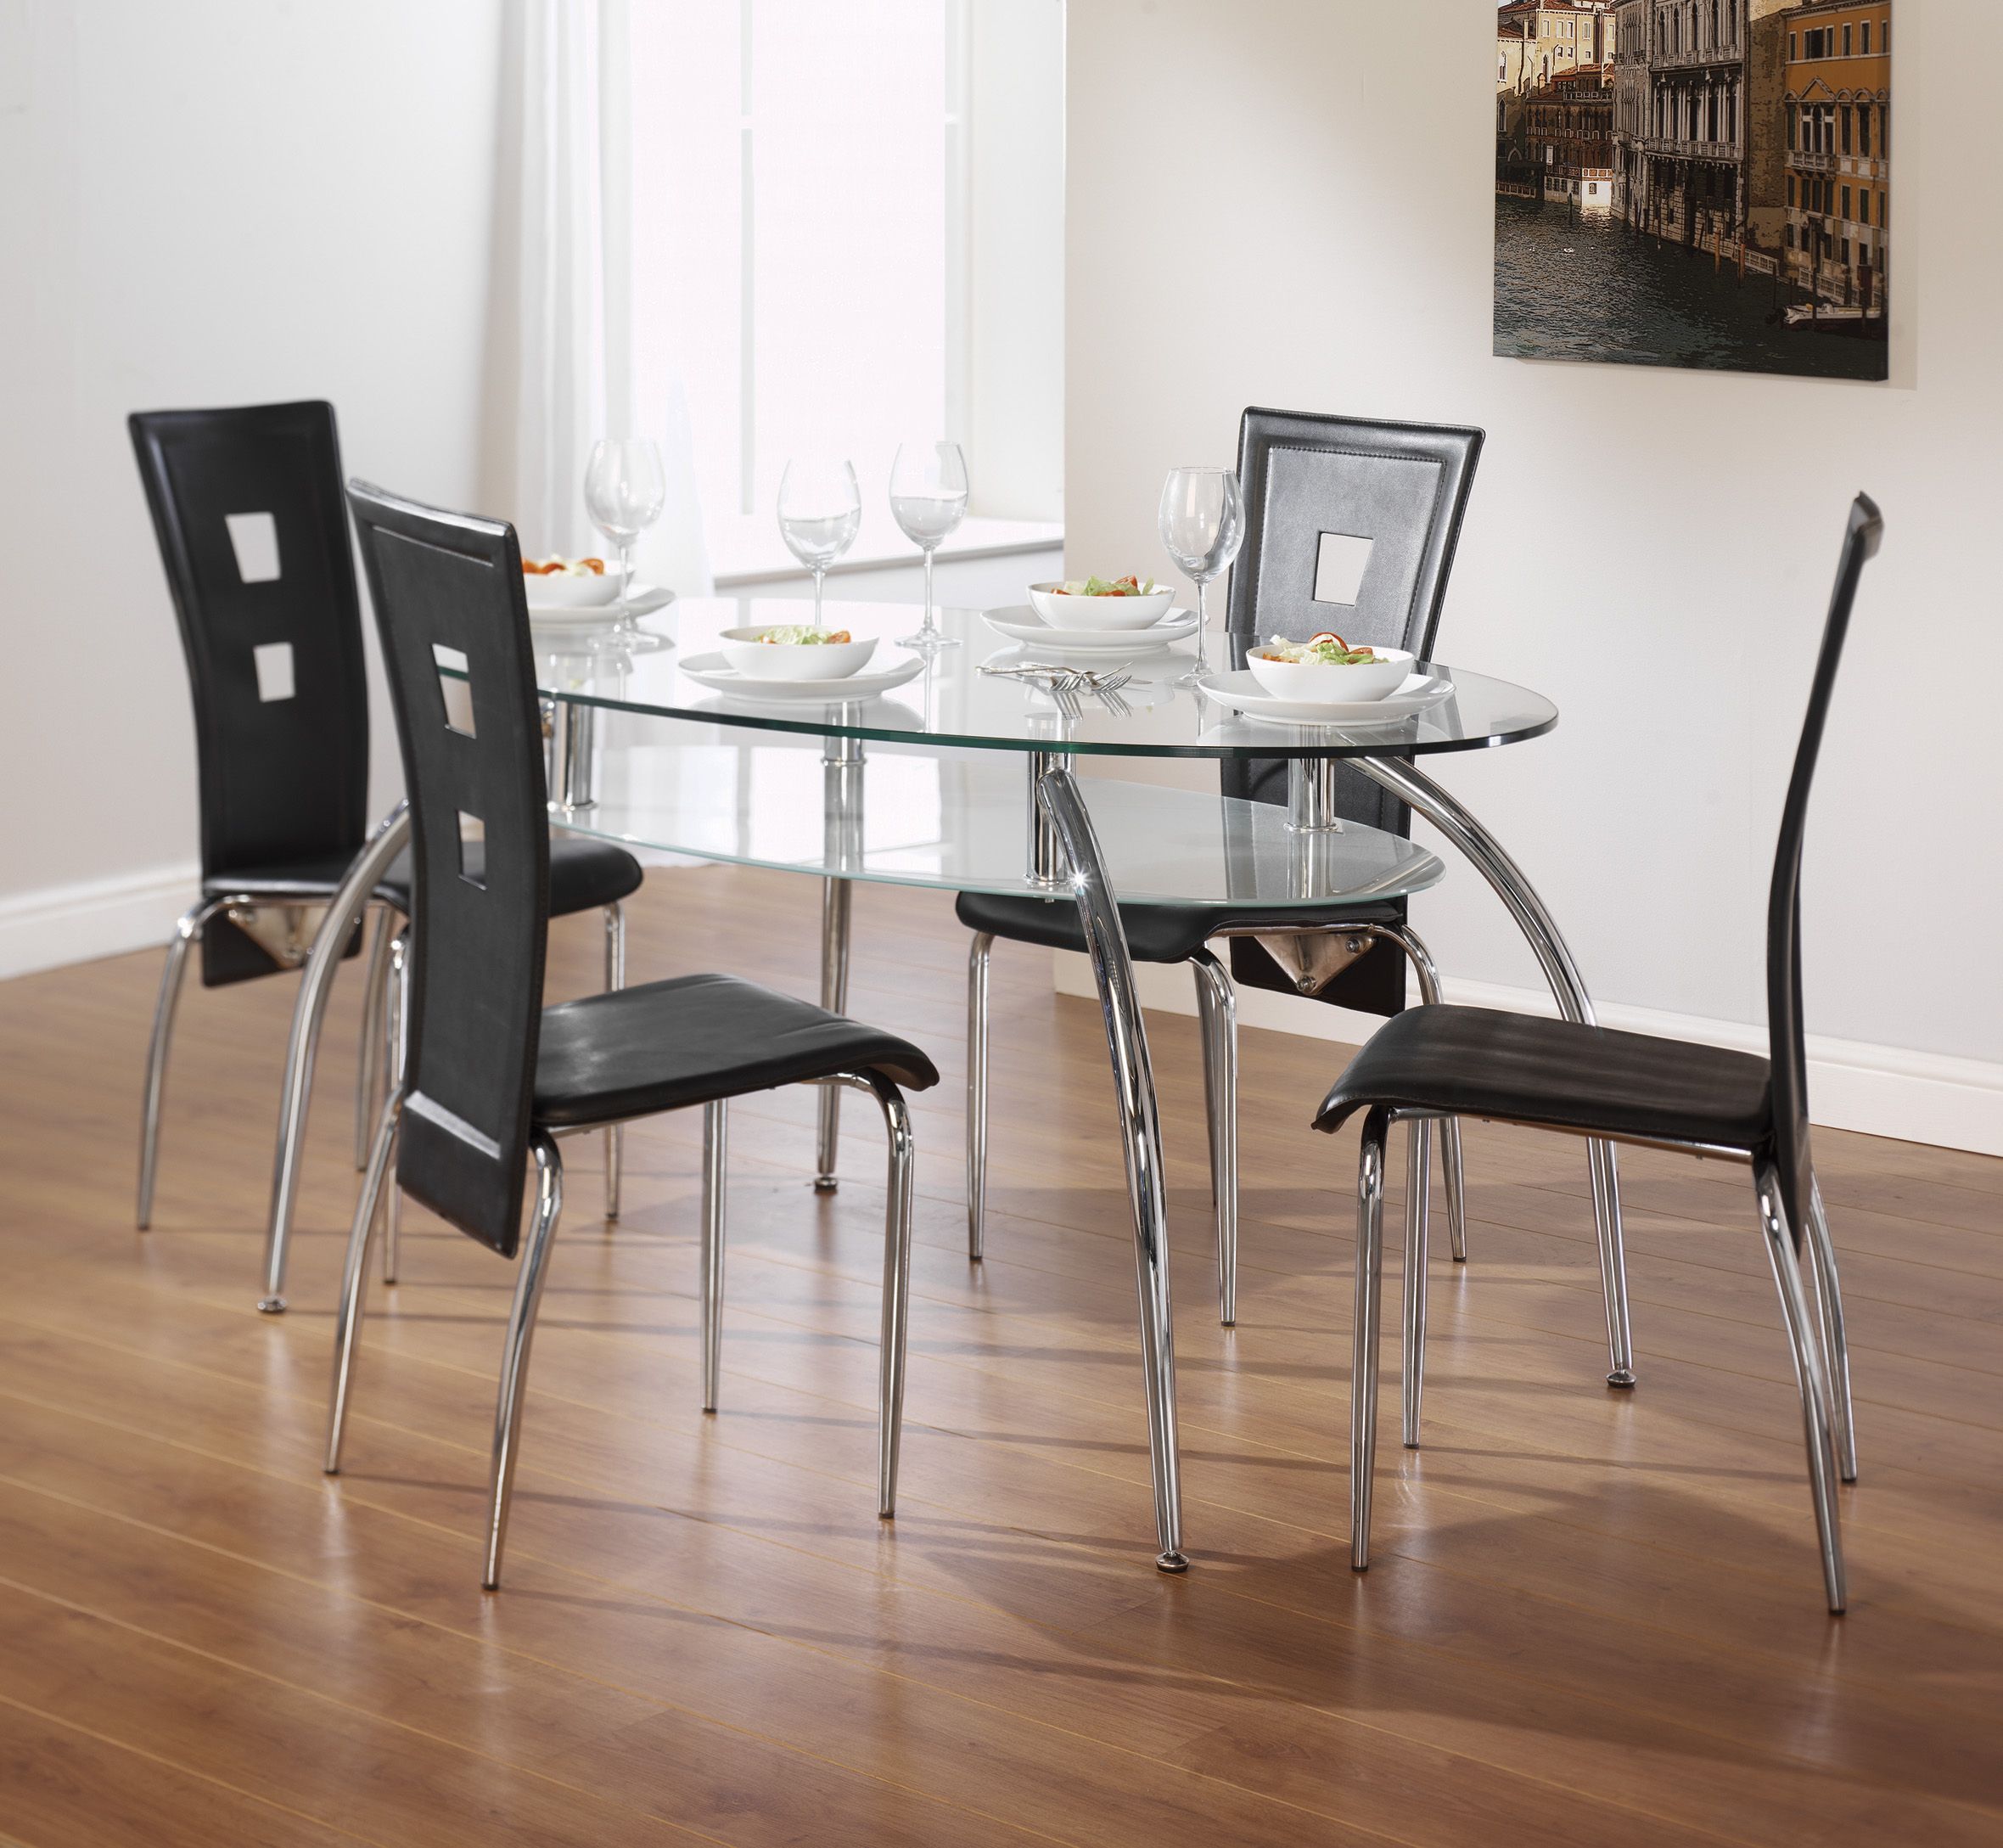 Most Popular Dining Tables At Aintree Liquidation Centre Throughout 4 Seater Round Wooden Dining Tables With Chrome Legs (View 7 of 25)